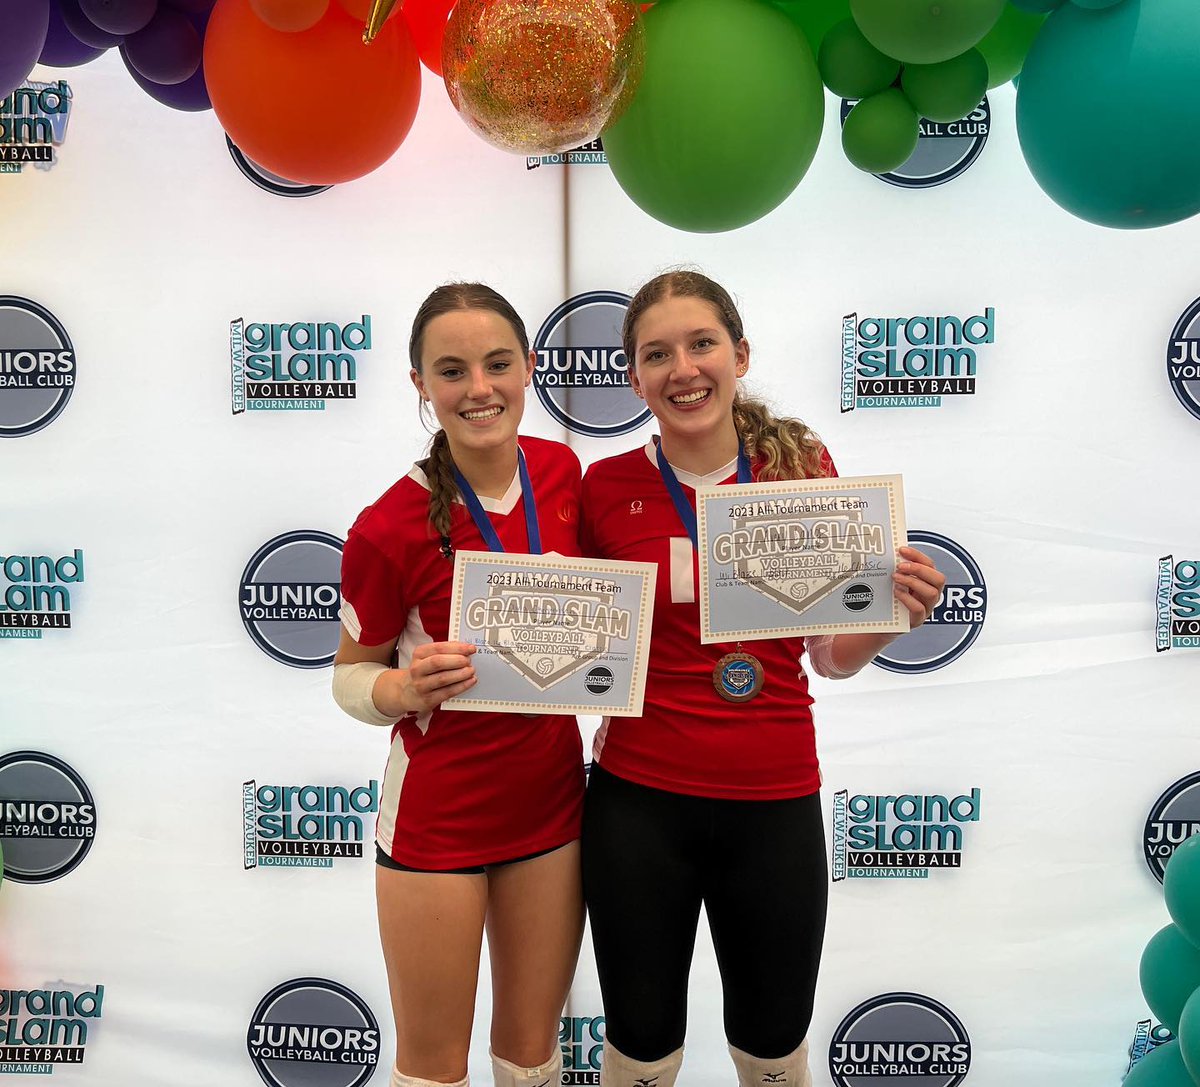 Congratulations to our 16s @wiblazevbNatl team on their 3rd place overall finish at the @WiJrs Grand Slam tournament! A special shoutout to Olivia Christensen & @averylang25 for making the All Tournament Team! 💪

#BeTheFlame🔥 #BlazeVolleyball🏐